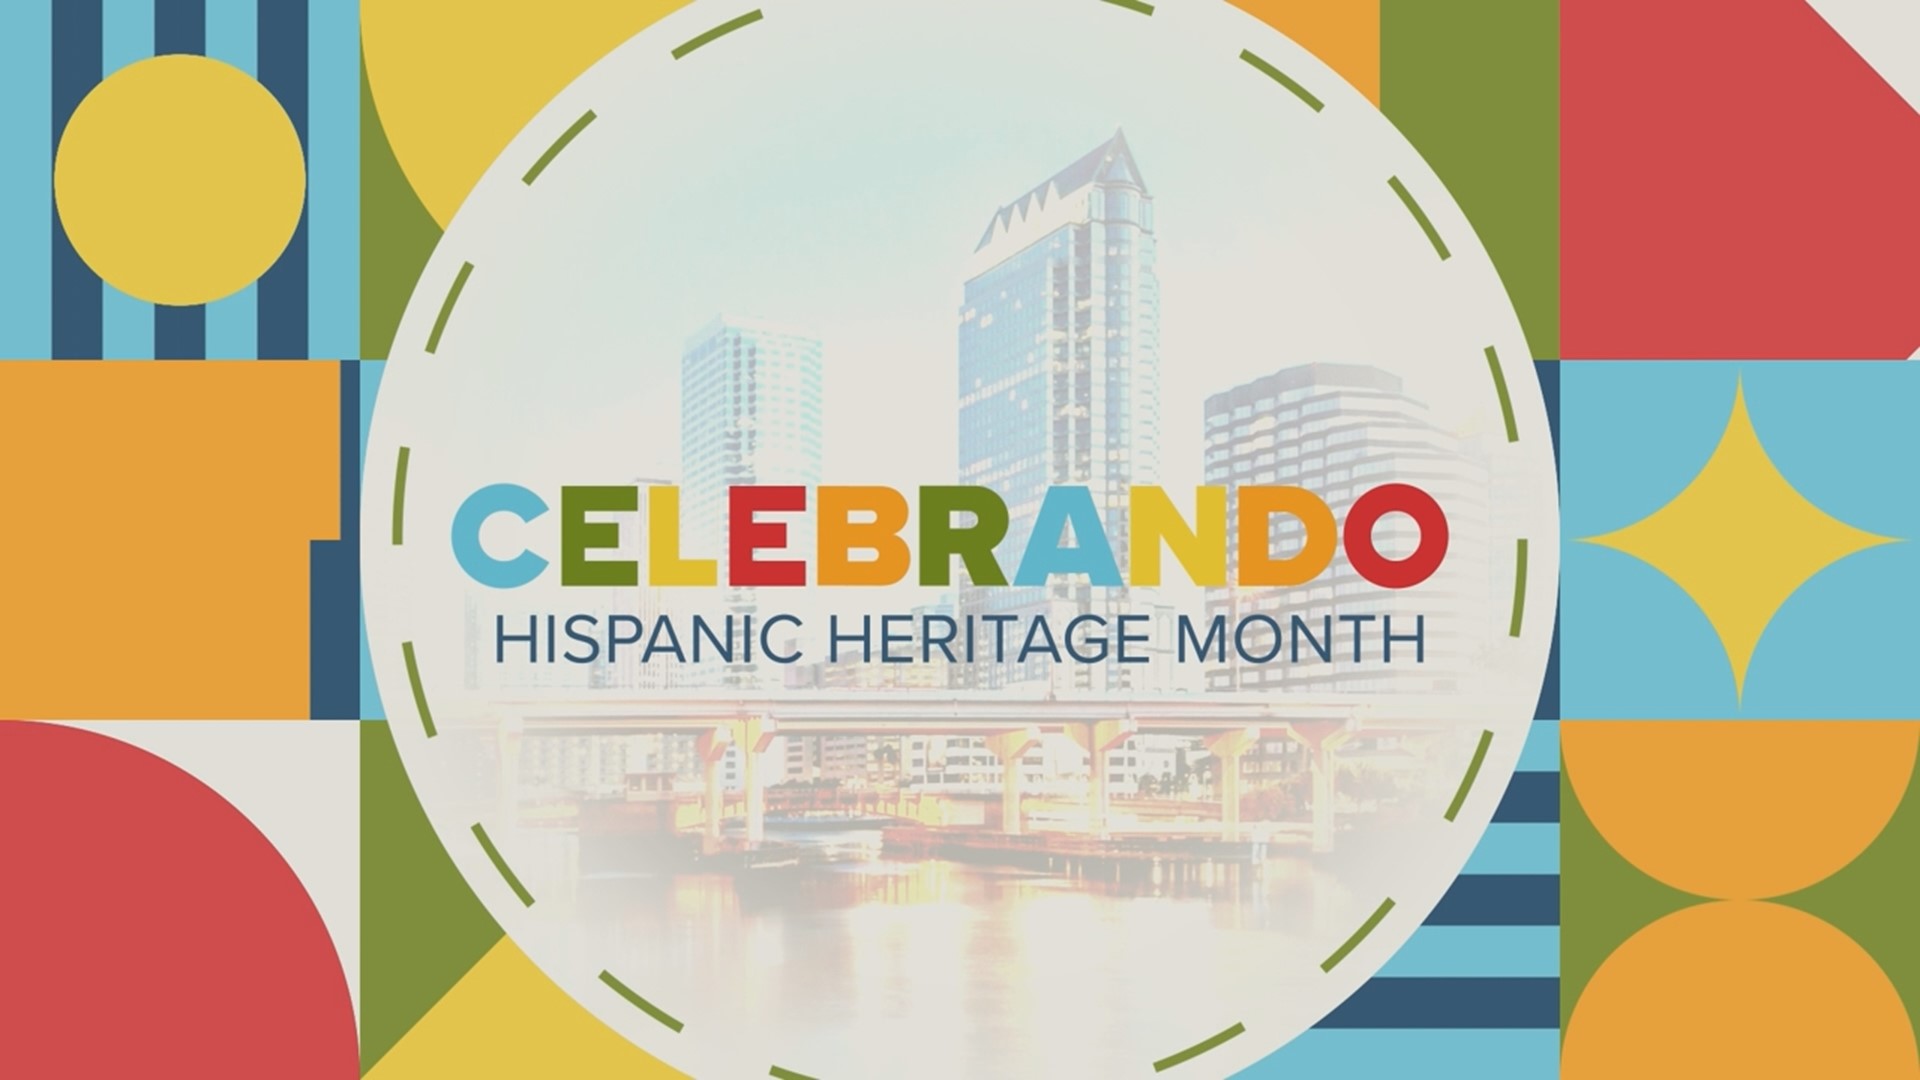 We take an in-depth look at the history, growth and impact of the Hispanic community across Tampa Bay.